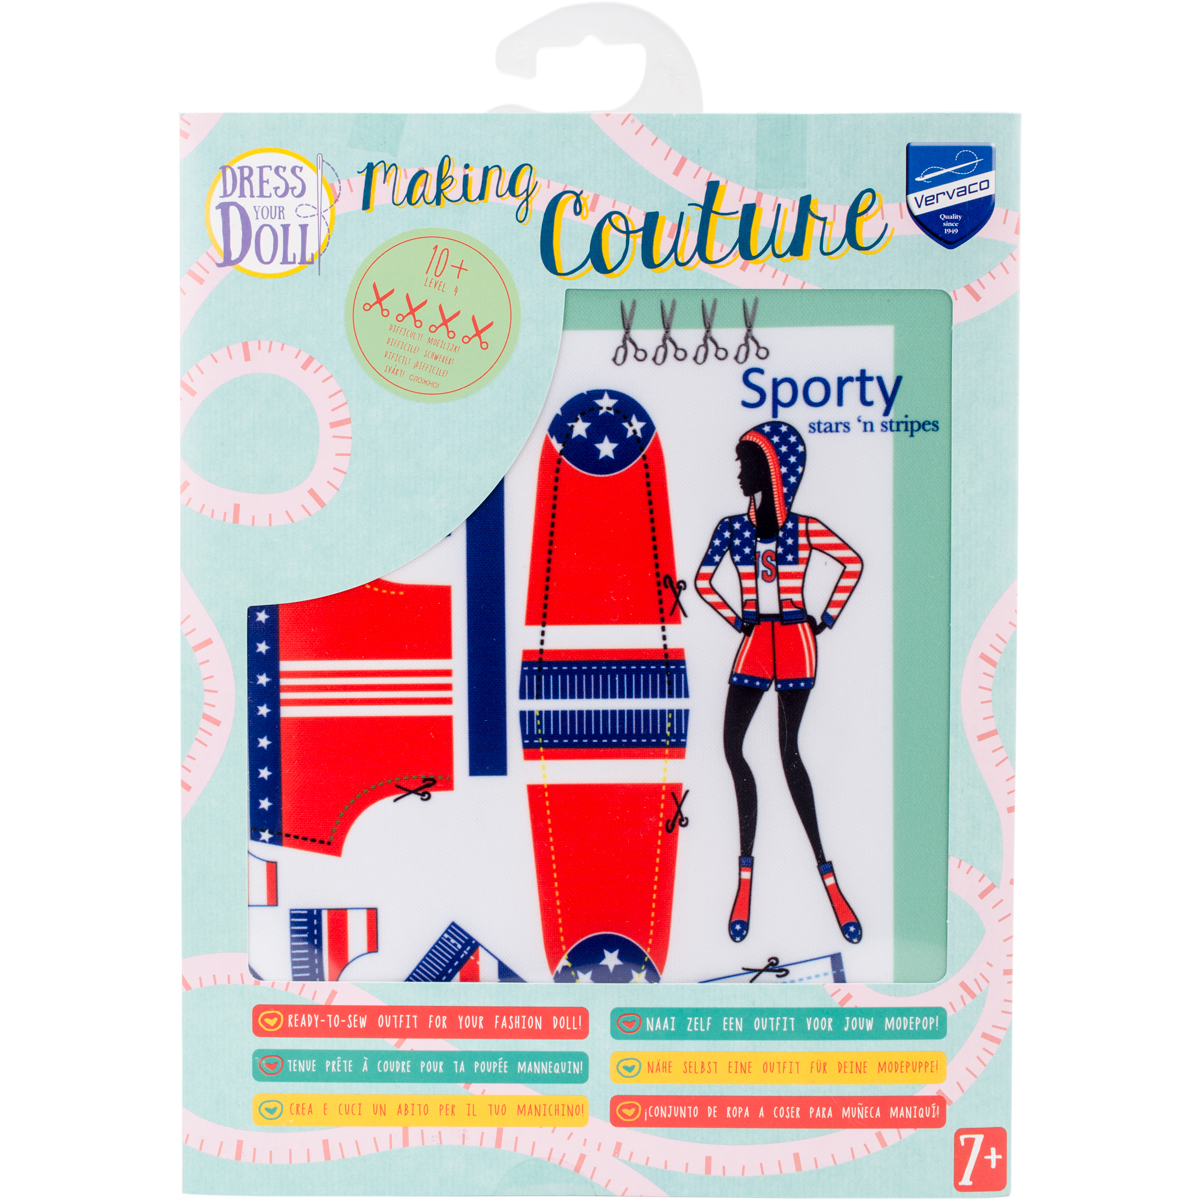 V0164667 Dress Your Doll Making Couture Outfit Set - Sporty Stars & Stripes